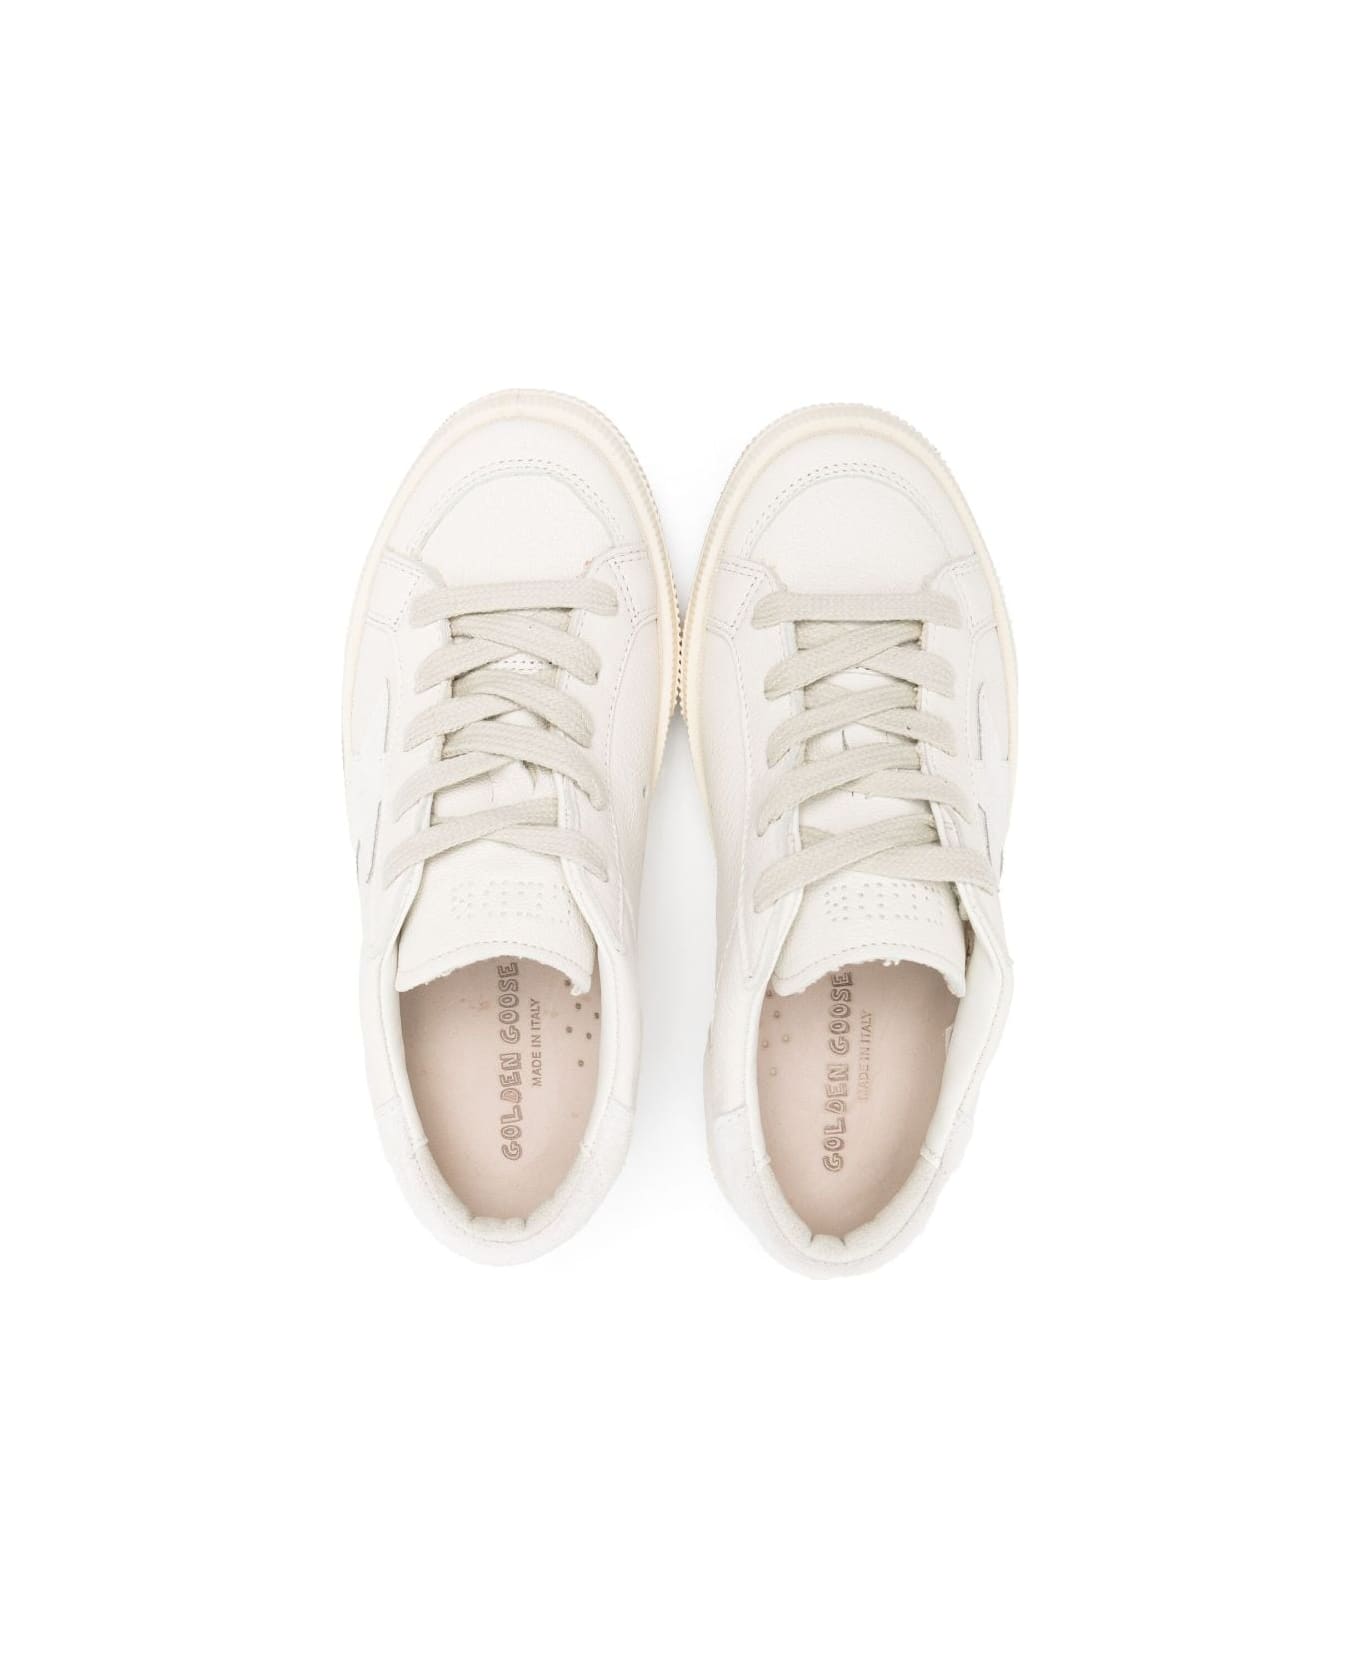 Golden Goose May Nappa Upper Suede Star And Heel - Optic White